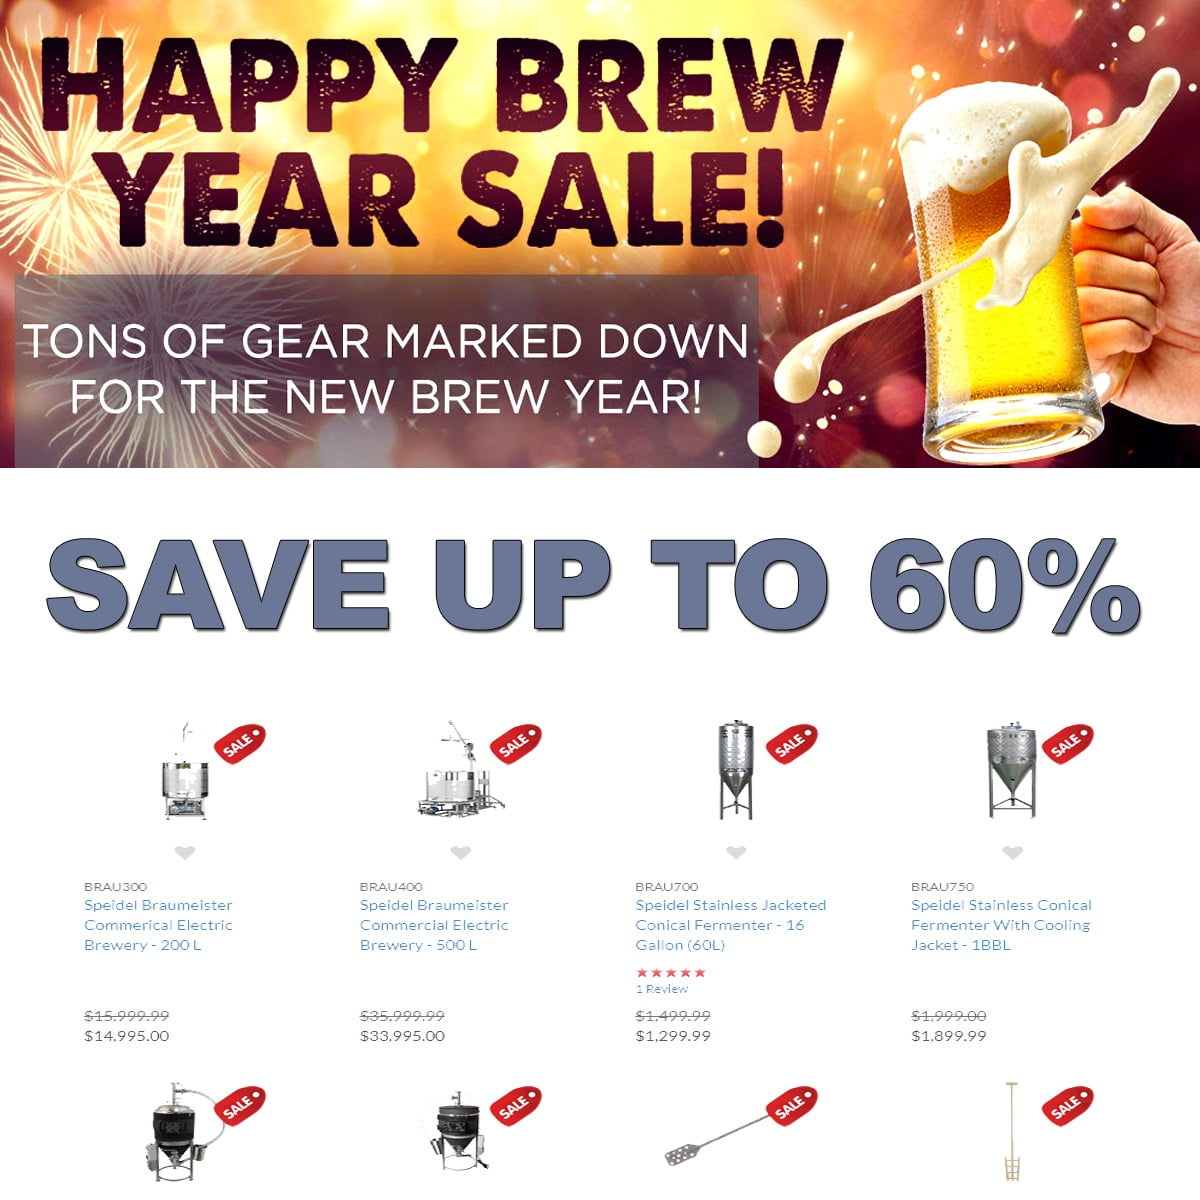 Save Up To 60% At The MoreBeer.com Happy Brew Year Sale